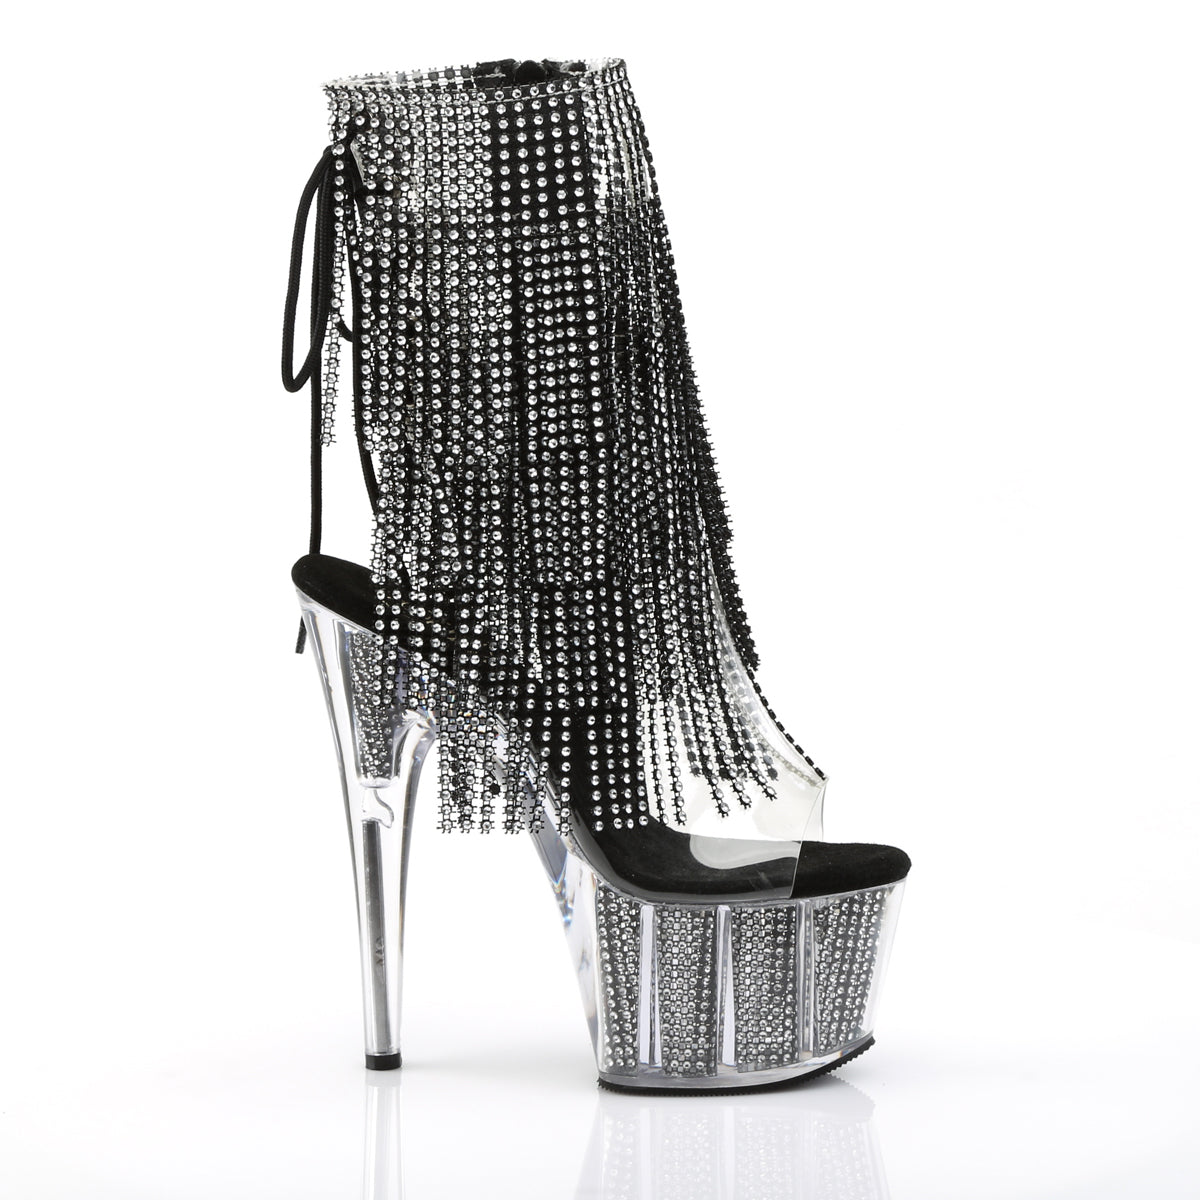 ADORE-1017SRS 7" Heel Clear Black Pole Dancing Ankle Boots-Pleaser- Sexy Shoes Fetish Heels